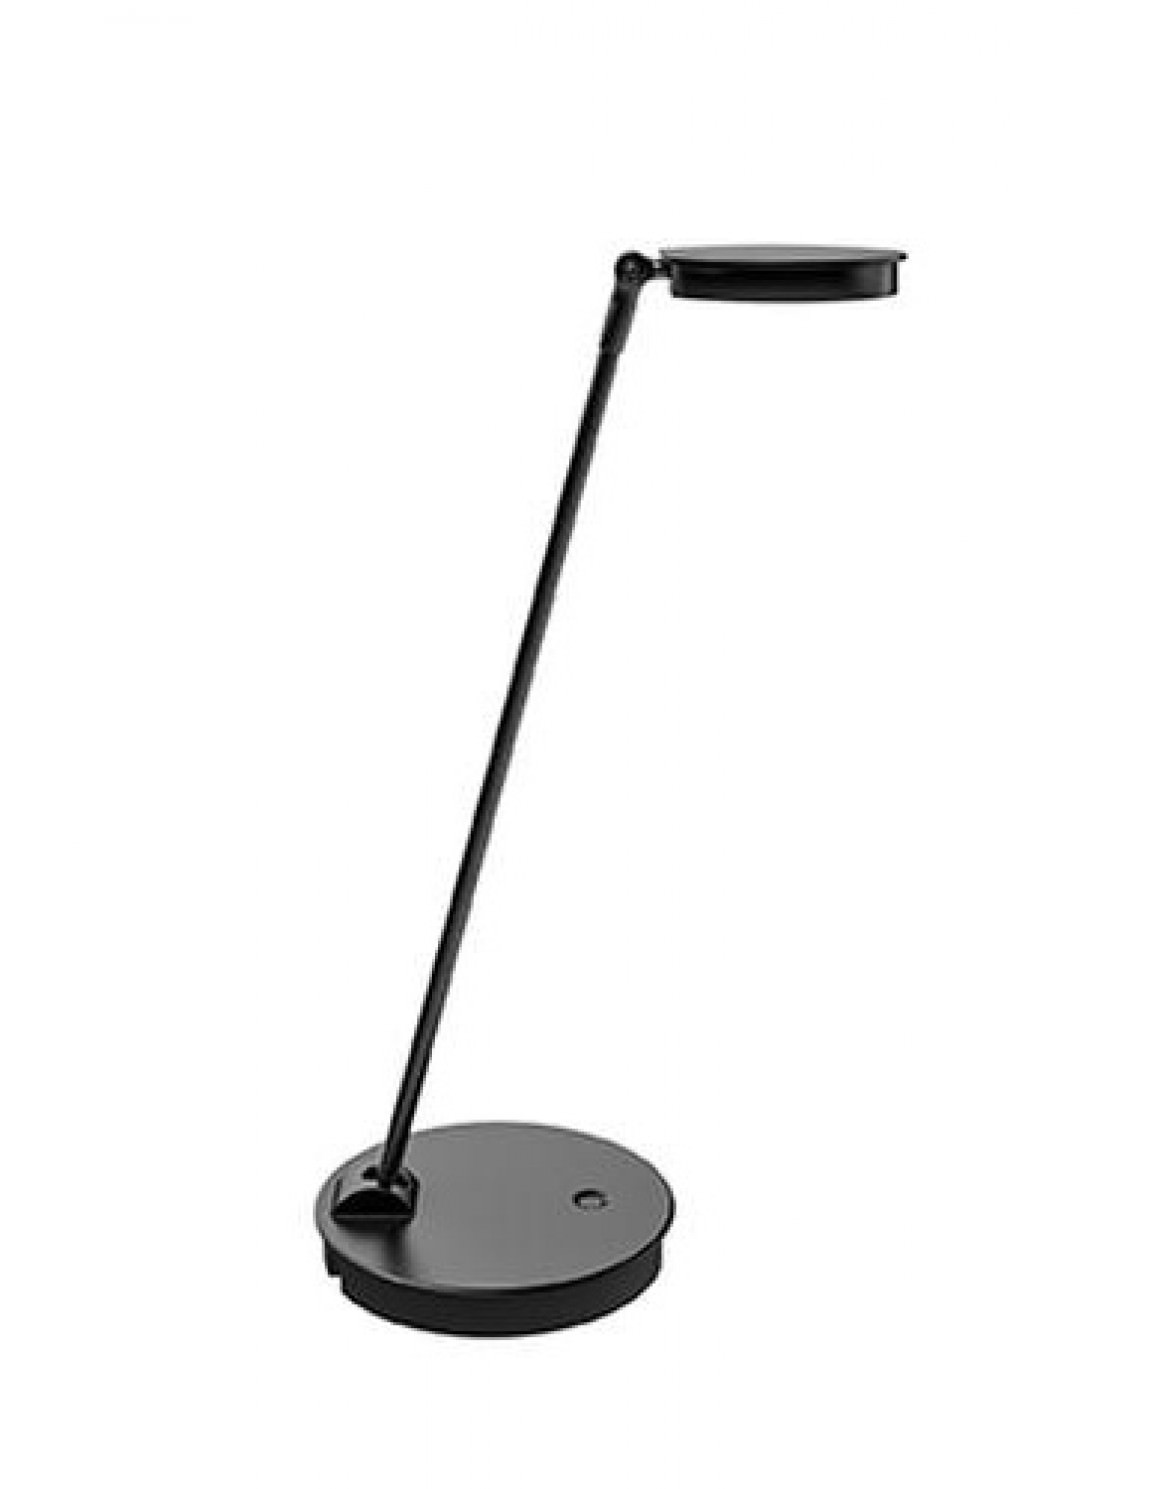 Single Arm Led Desk Lamp With Usb, Table Lamps Madison Wi